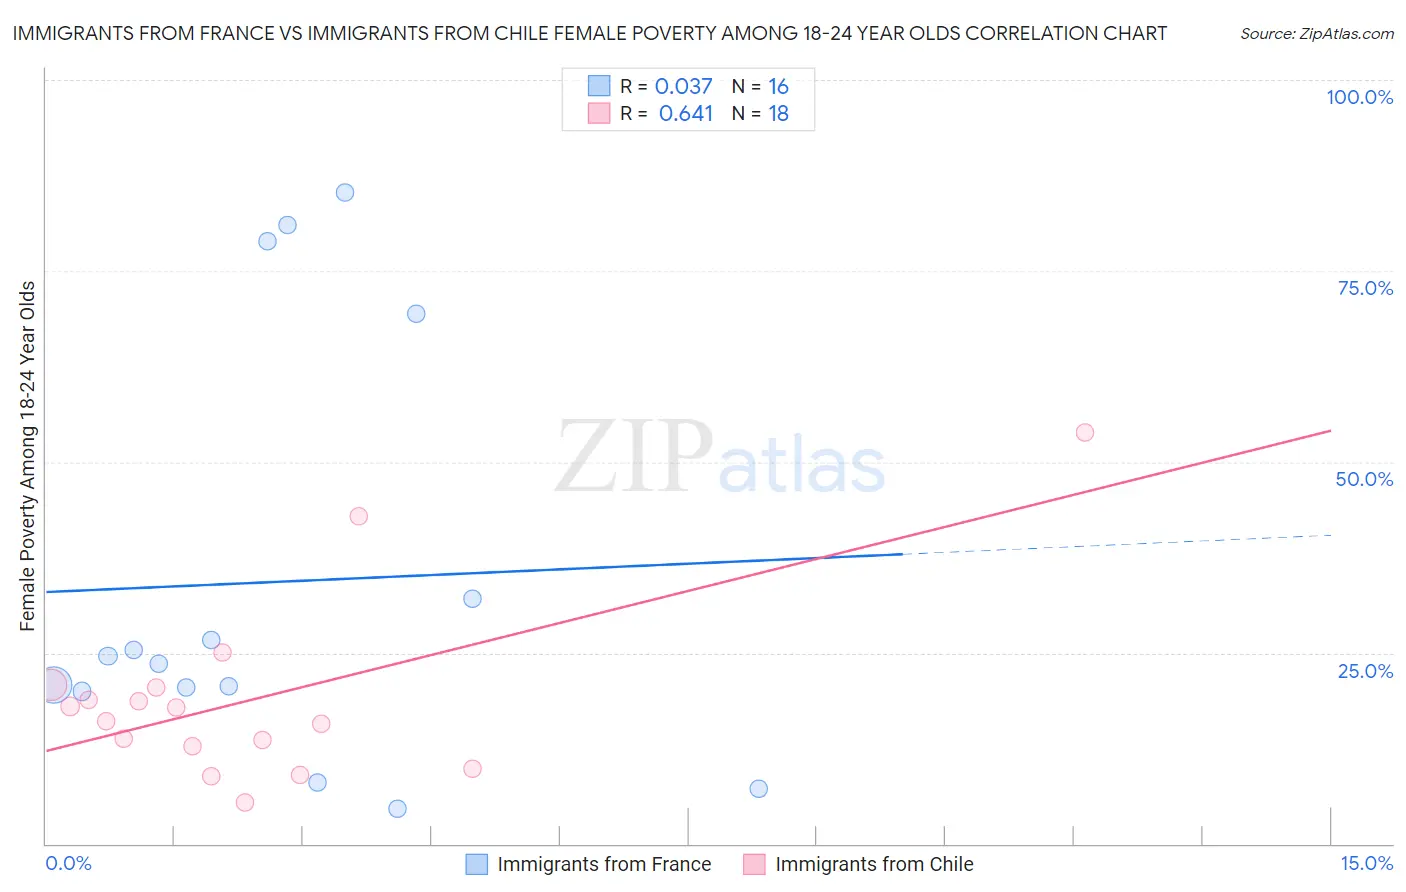 Immigrants from France vs Immigrants from Chile Female Poverty Among 18-24 Year Olds